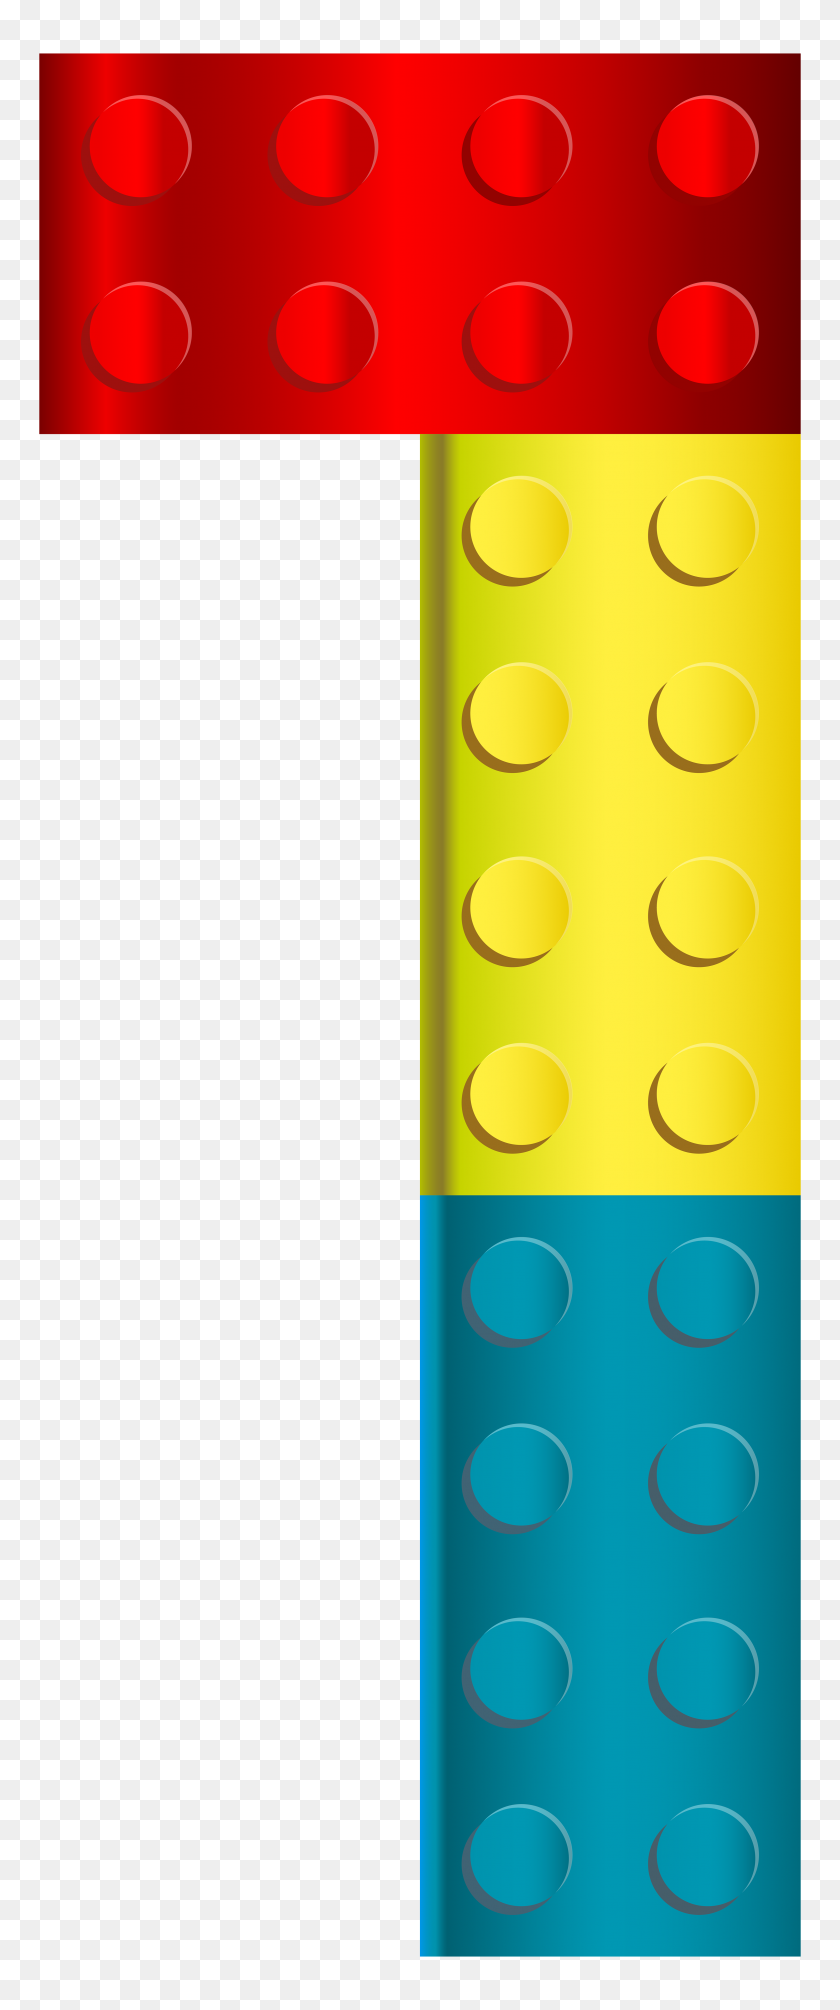 3200x8000 Lego Clipart Uno - Lego Clipart Png